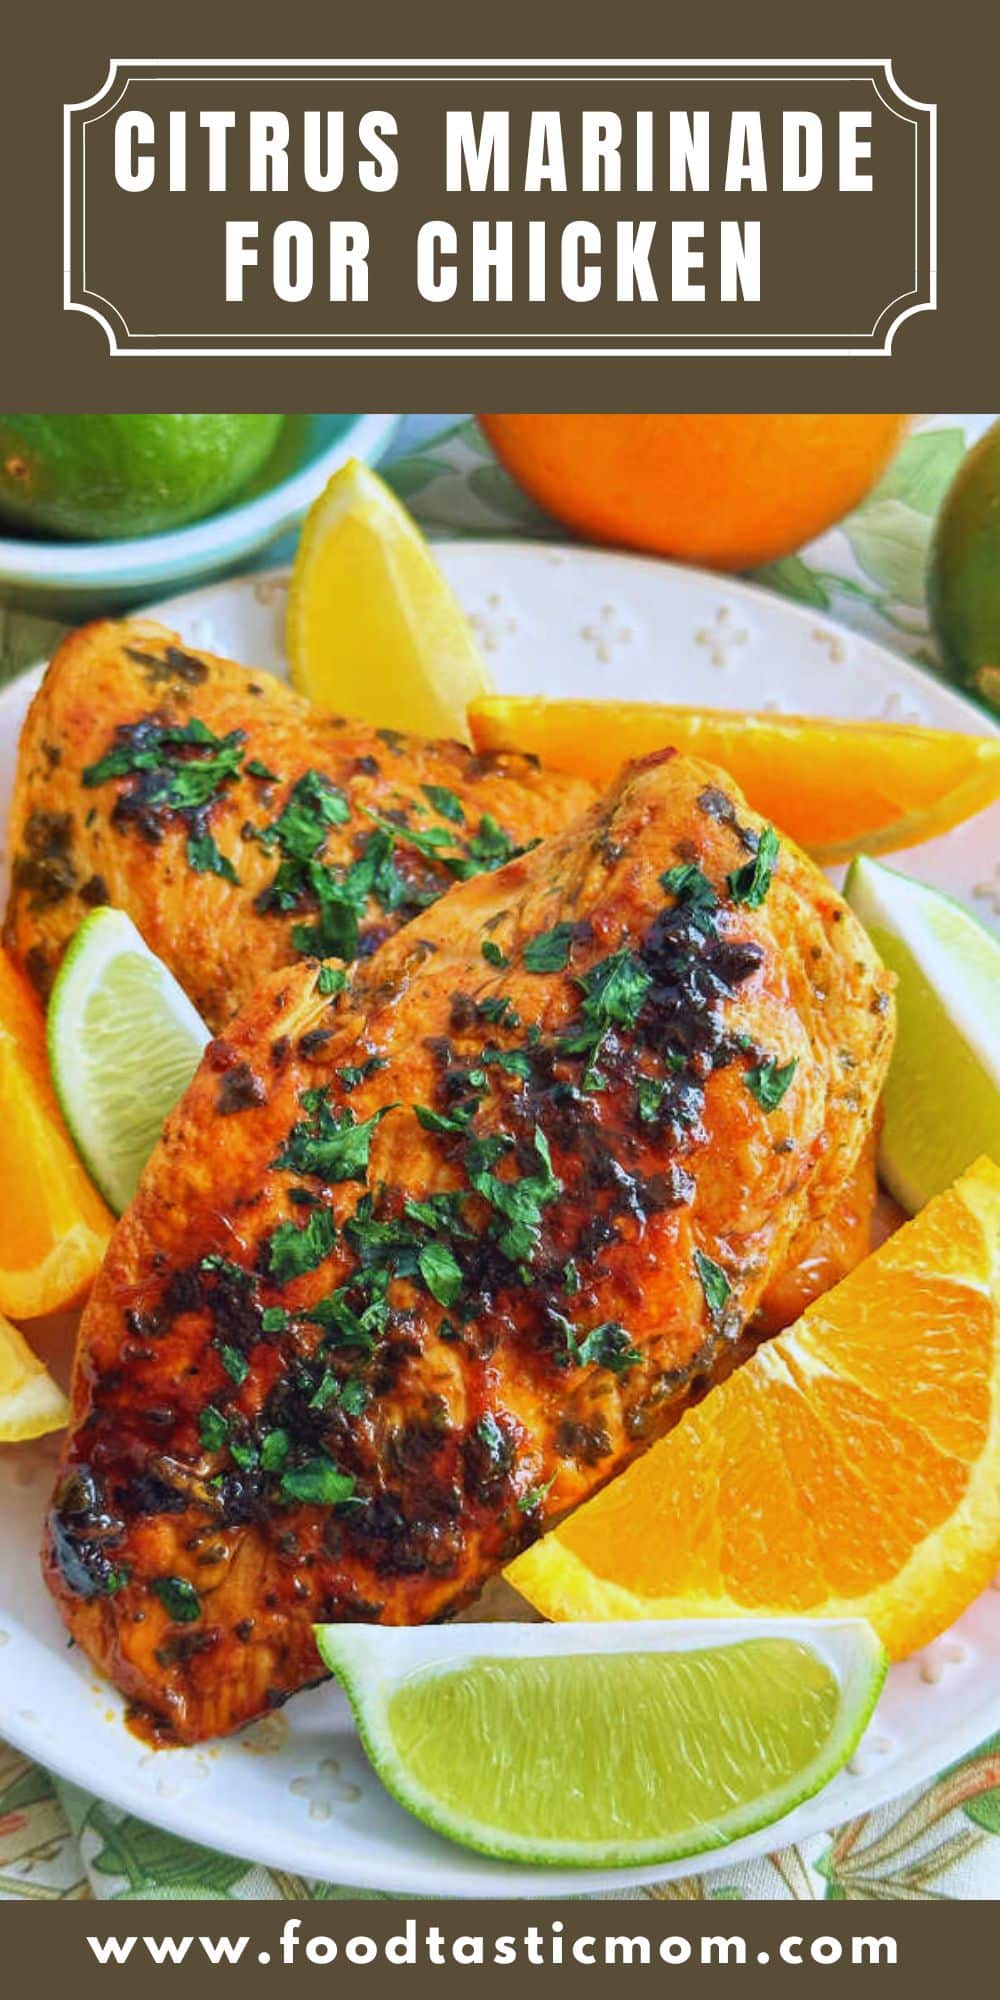 Simple ingredients combine to make the best citrus marinade for chicken, plus a secret ingredient for extra juicy boneless chicken breasts. via @foodtasticmom